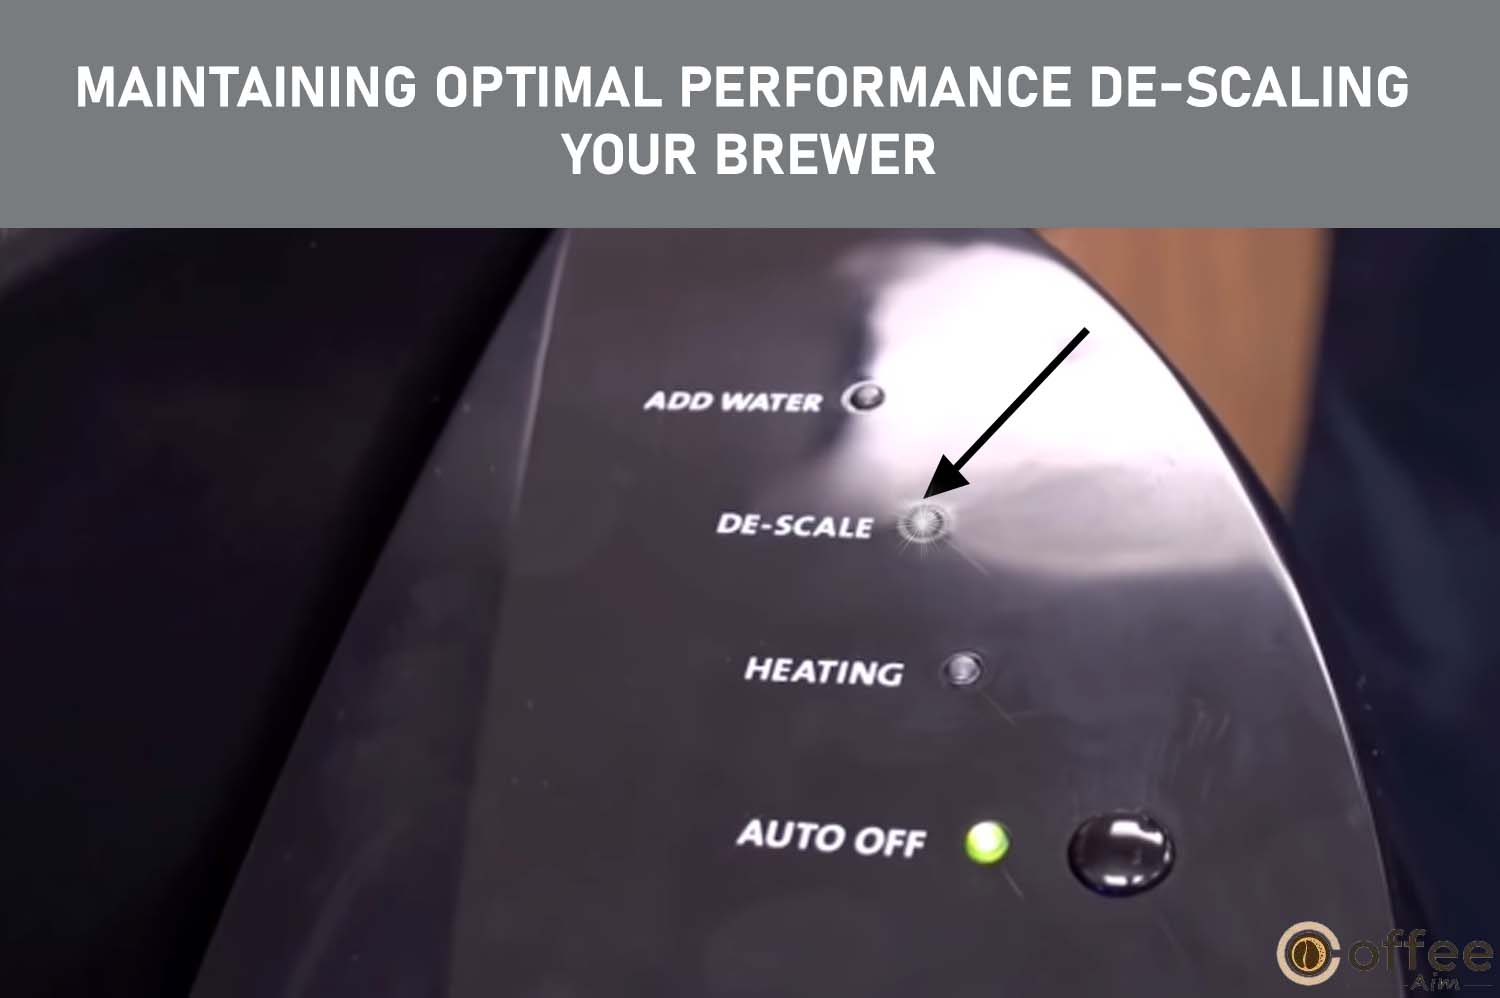 This illustrative image vividly depicts the crucial process of 'DE-SCALE,' aligning perfectly with the overarching theme of 'Maintaining Optimal Performance: De-Scaling Your Brewer.' As a pivotal visual element for the comprehensive article on 'How to Use Keurig B-40,' the image serves as a compelling guide to understand the intricacies of the de-scaling procedure, ensuring a pristine and effective Brewer performance.